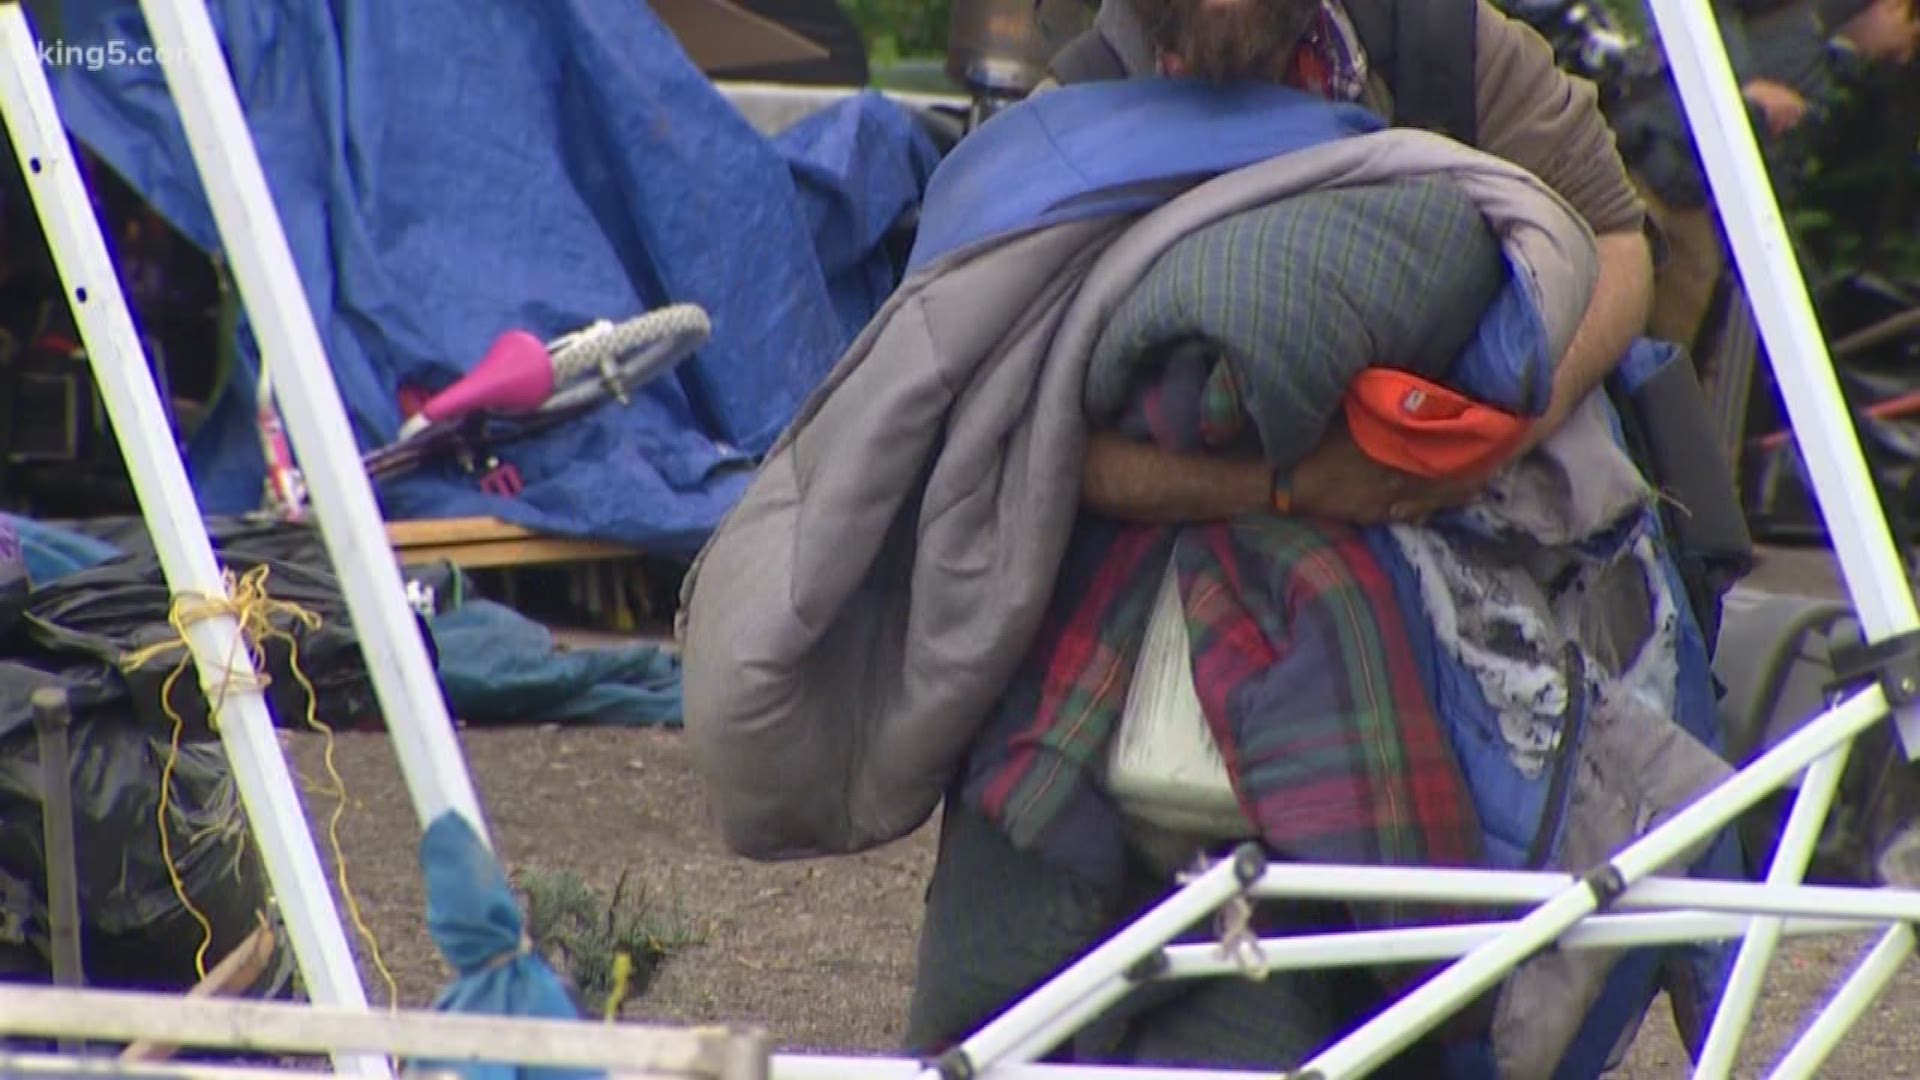 Homeless numbers are down in Seattle. That's according to new data, and as the city's Mayor boosts staffing for the crew charged with managing encampments. KING 5's Chris Daniels reports.